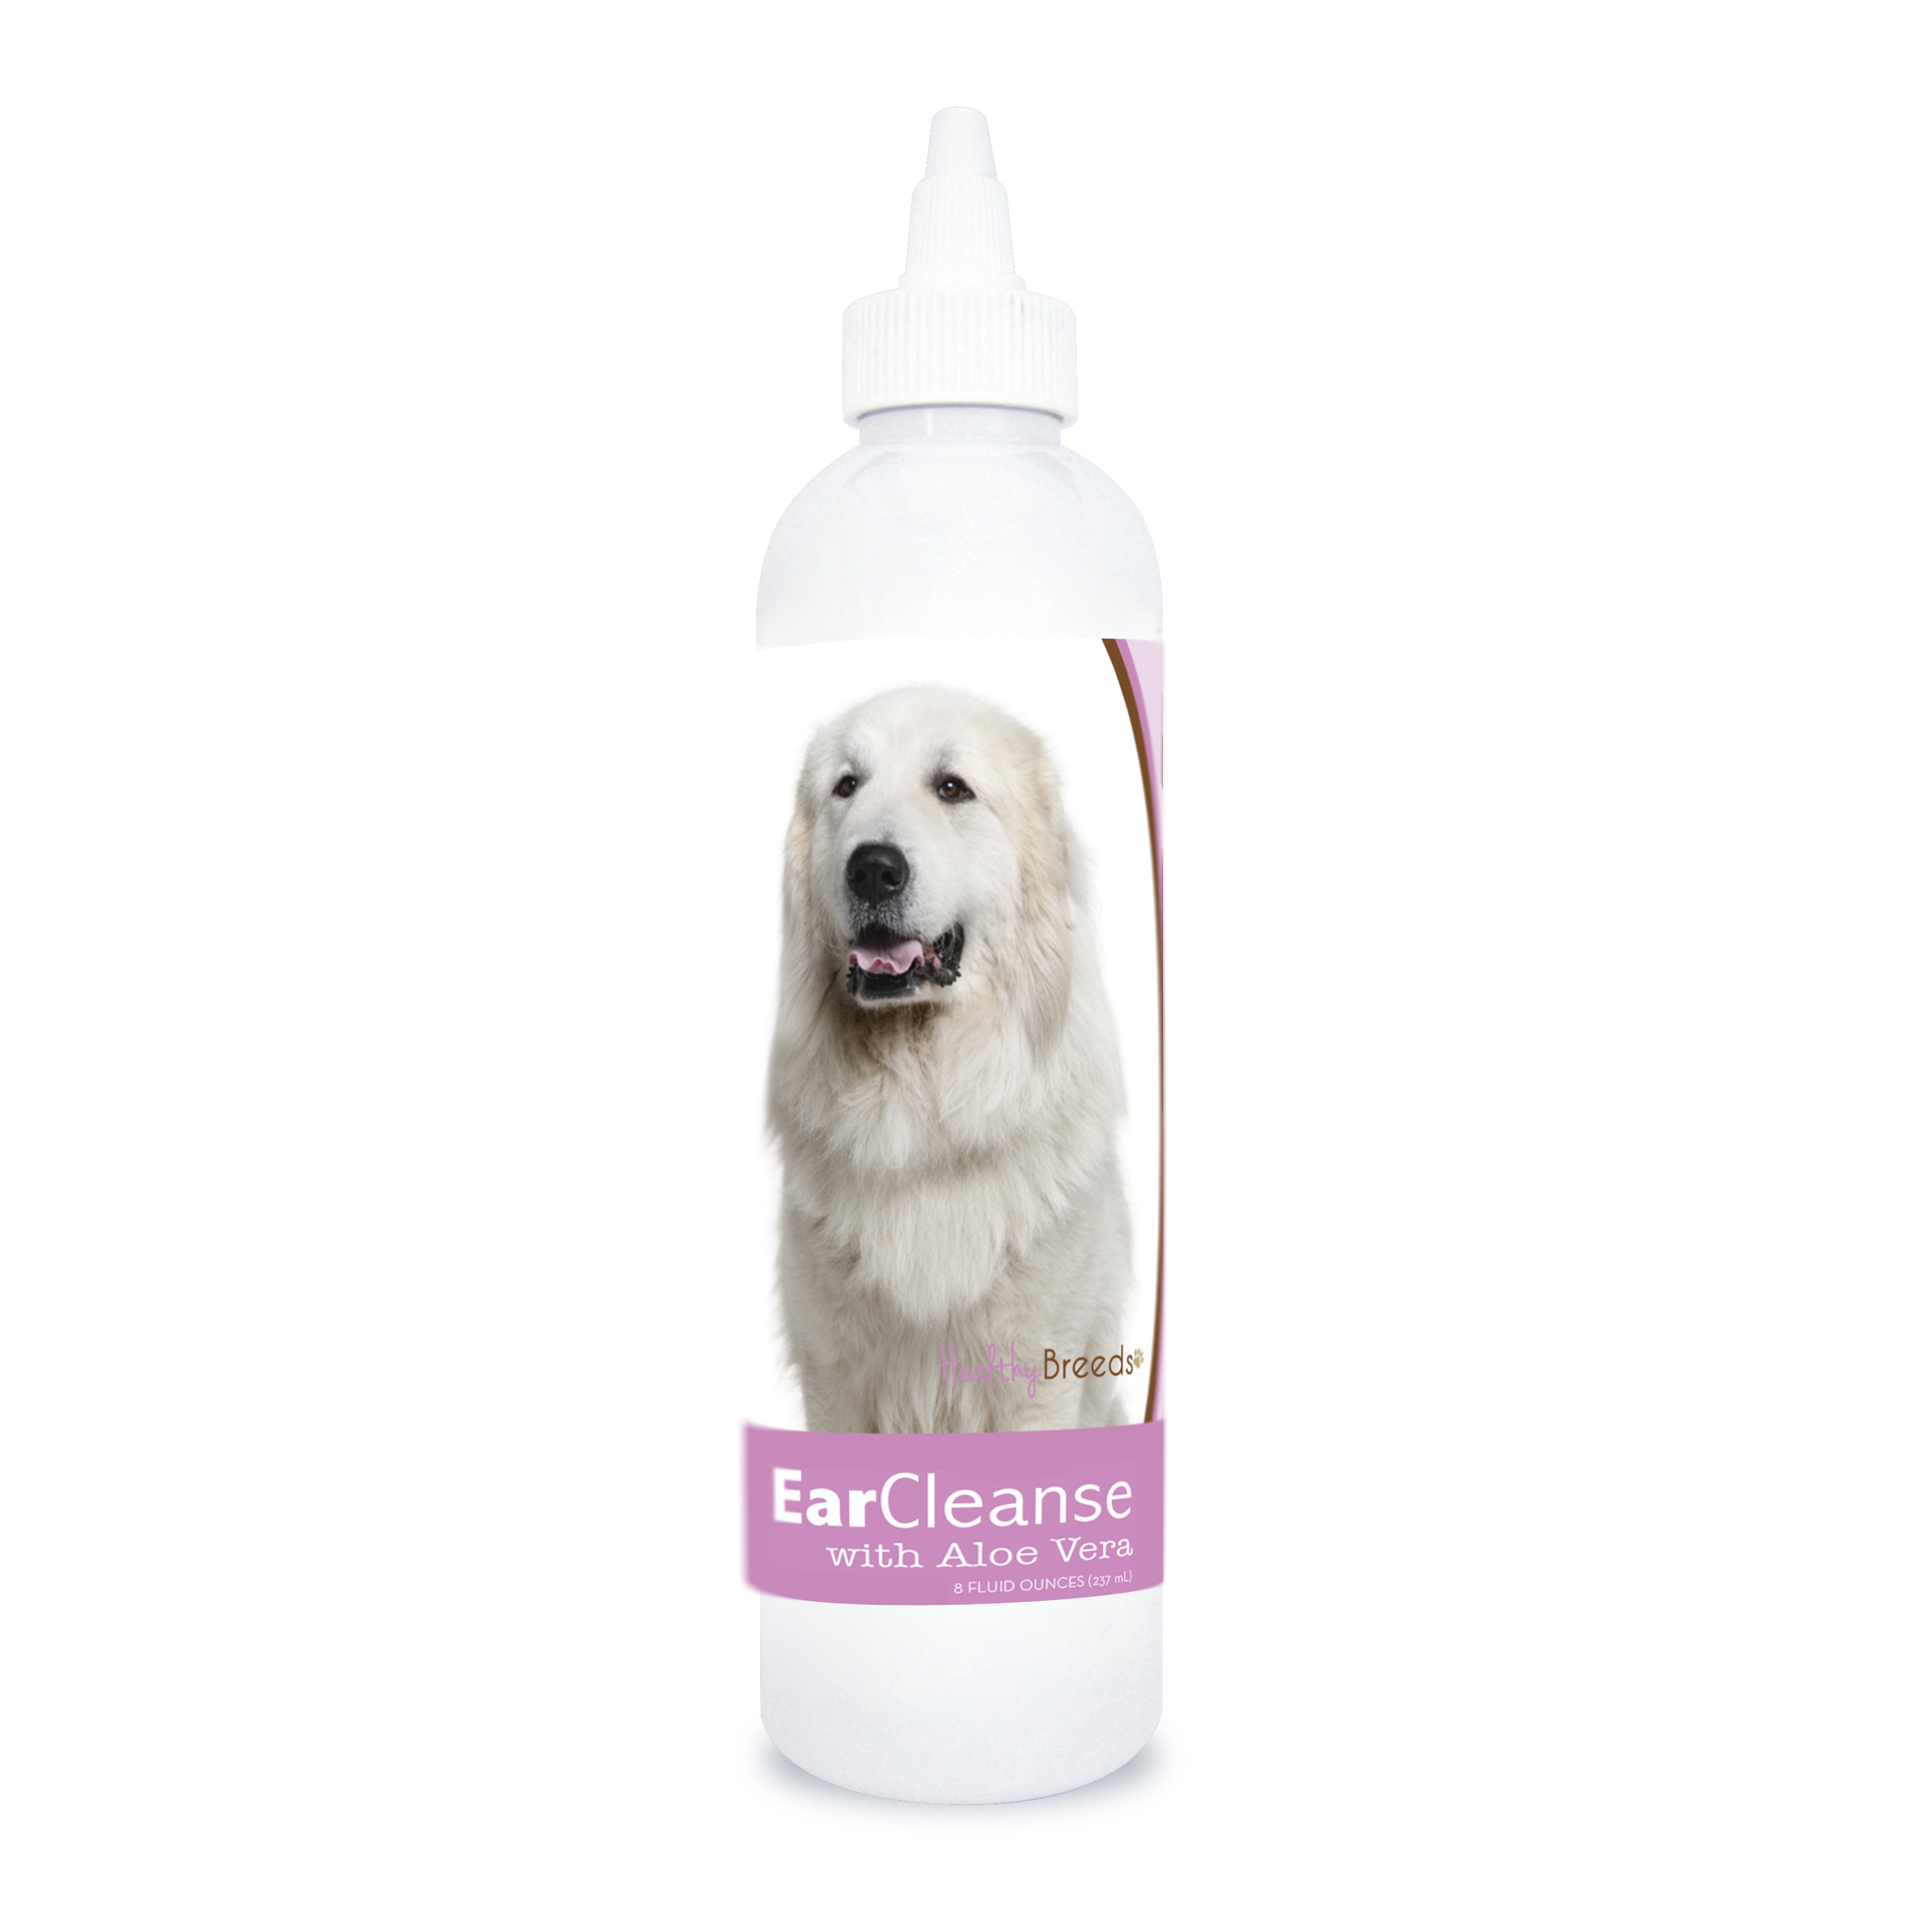 Great Pyrenees Ear Cleanse with Aloe Vera Sweet Pea and Vanilla 8 oz